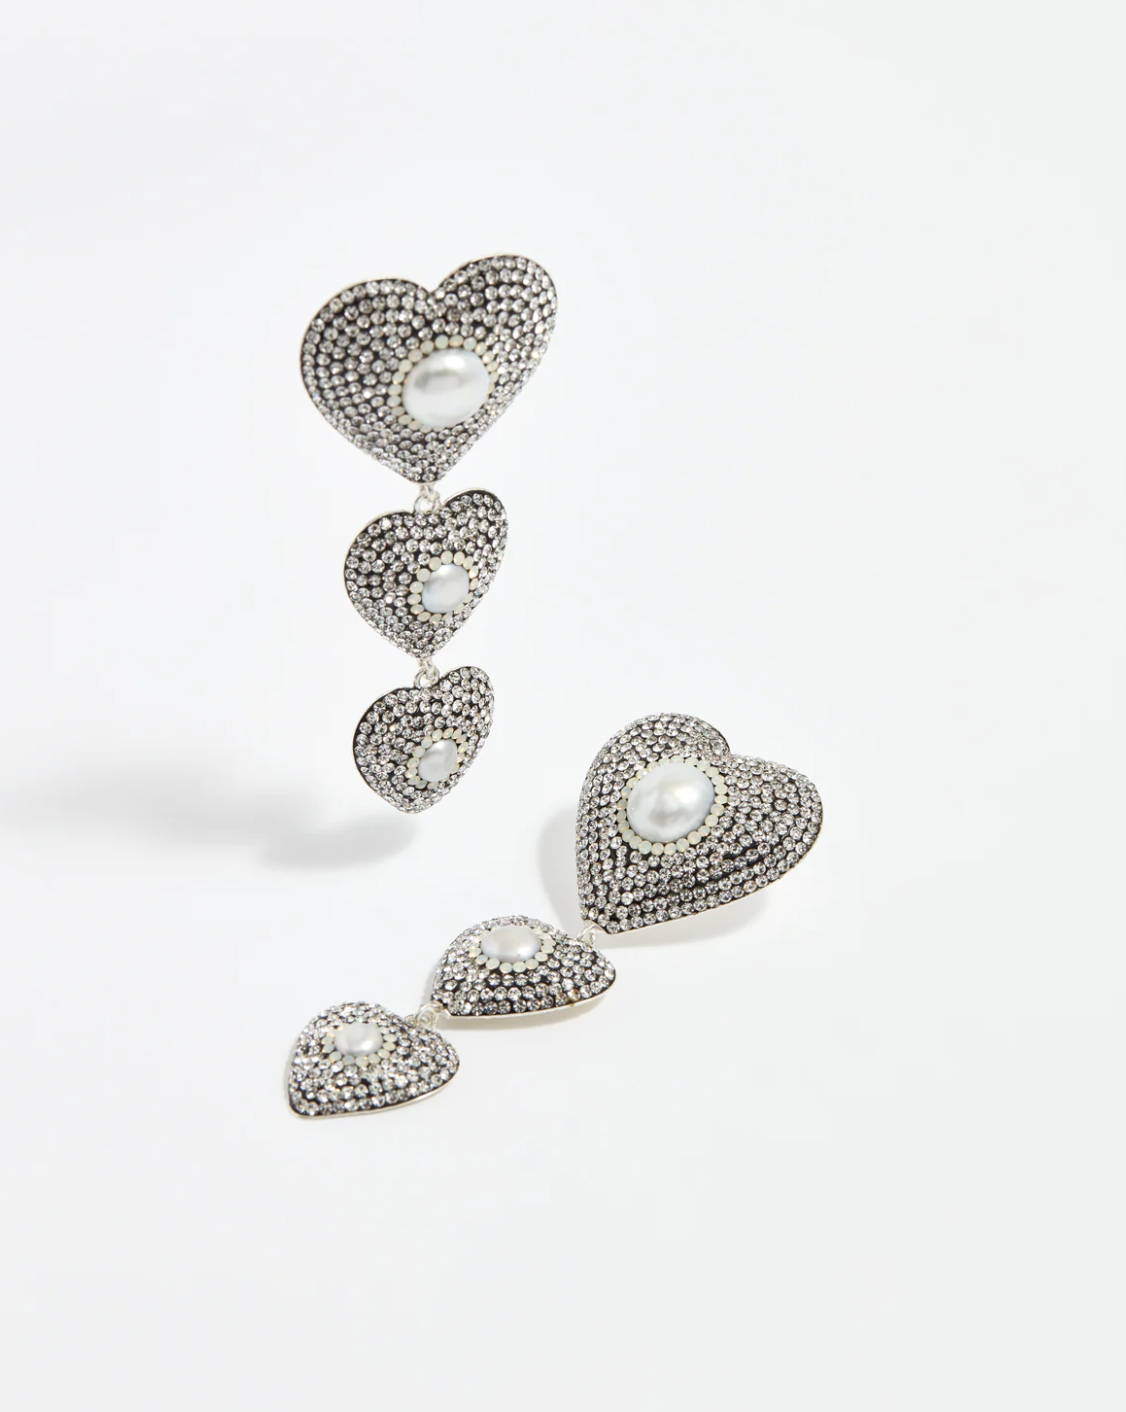 SORU JEWELELRY CRYSTAL HEART EARRINGS ON KELSEA BALLERINI Rhodium plated solid silver, baroque pearls and crystals